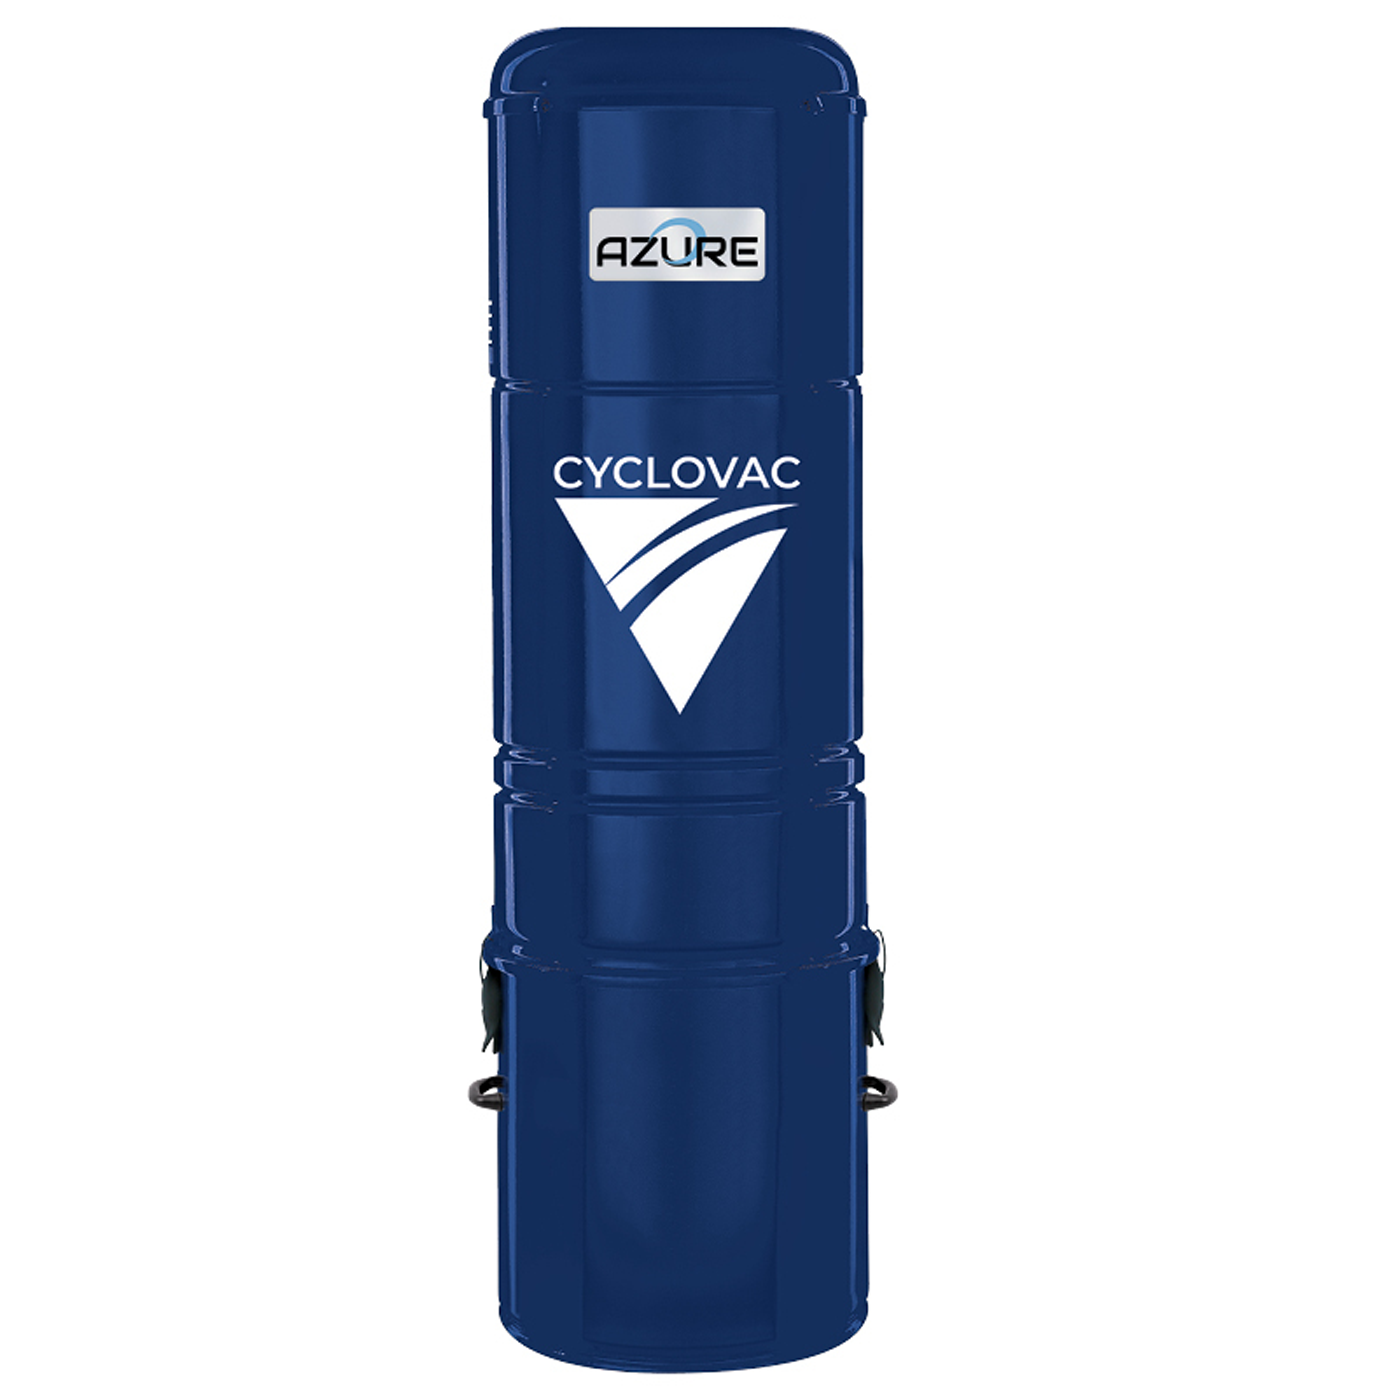 Cyclovac Azure H615 Special Edition 700AW Central Vacuum Canister